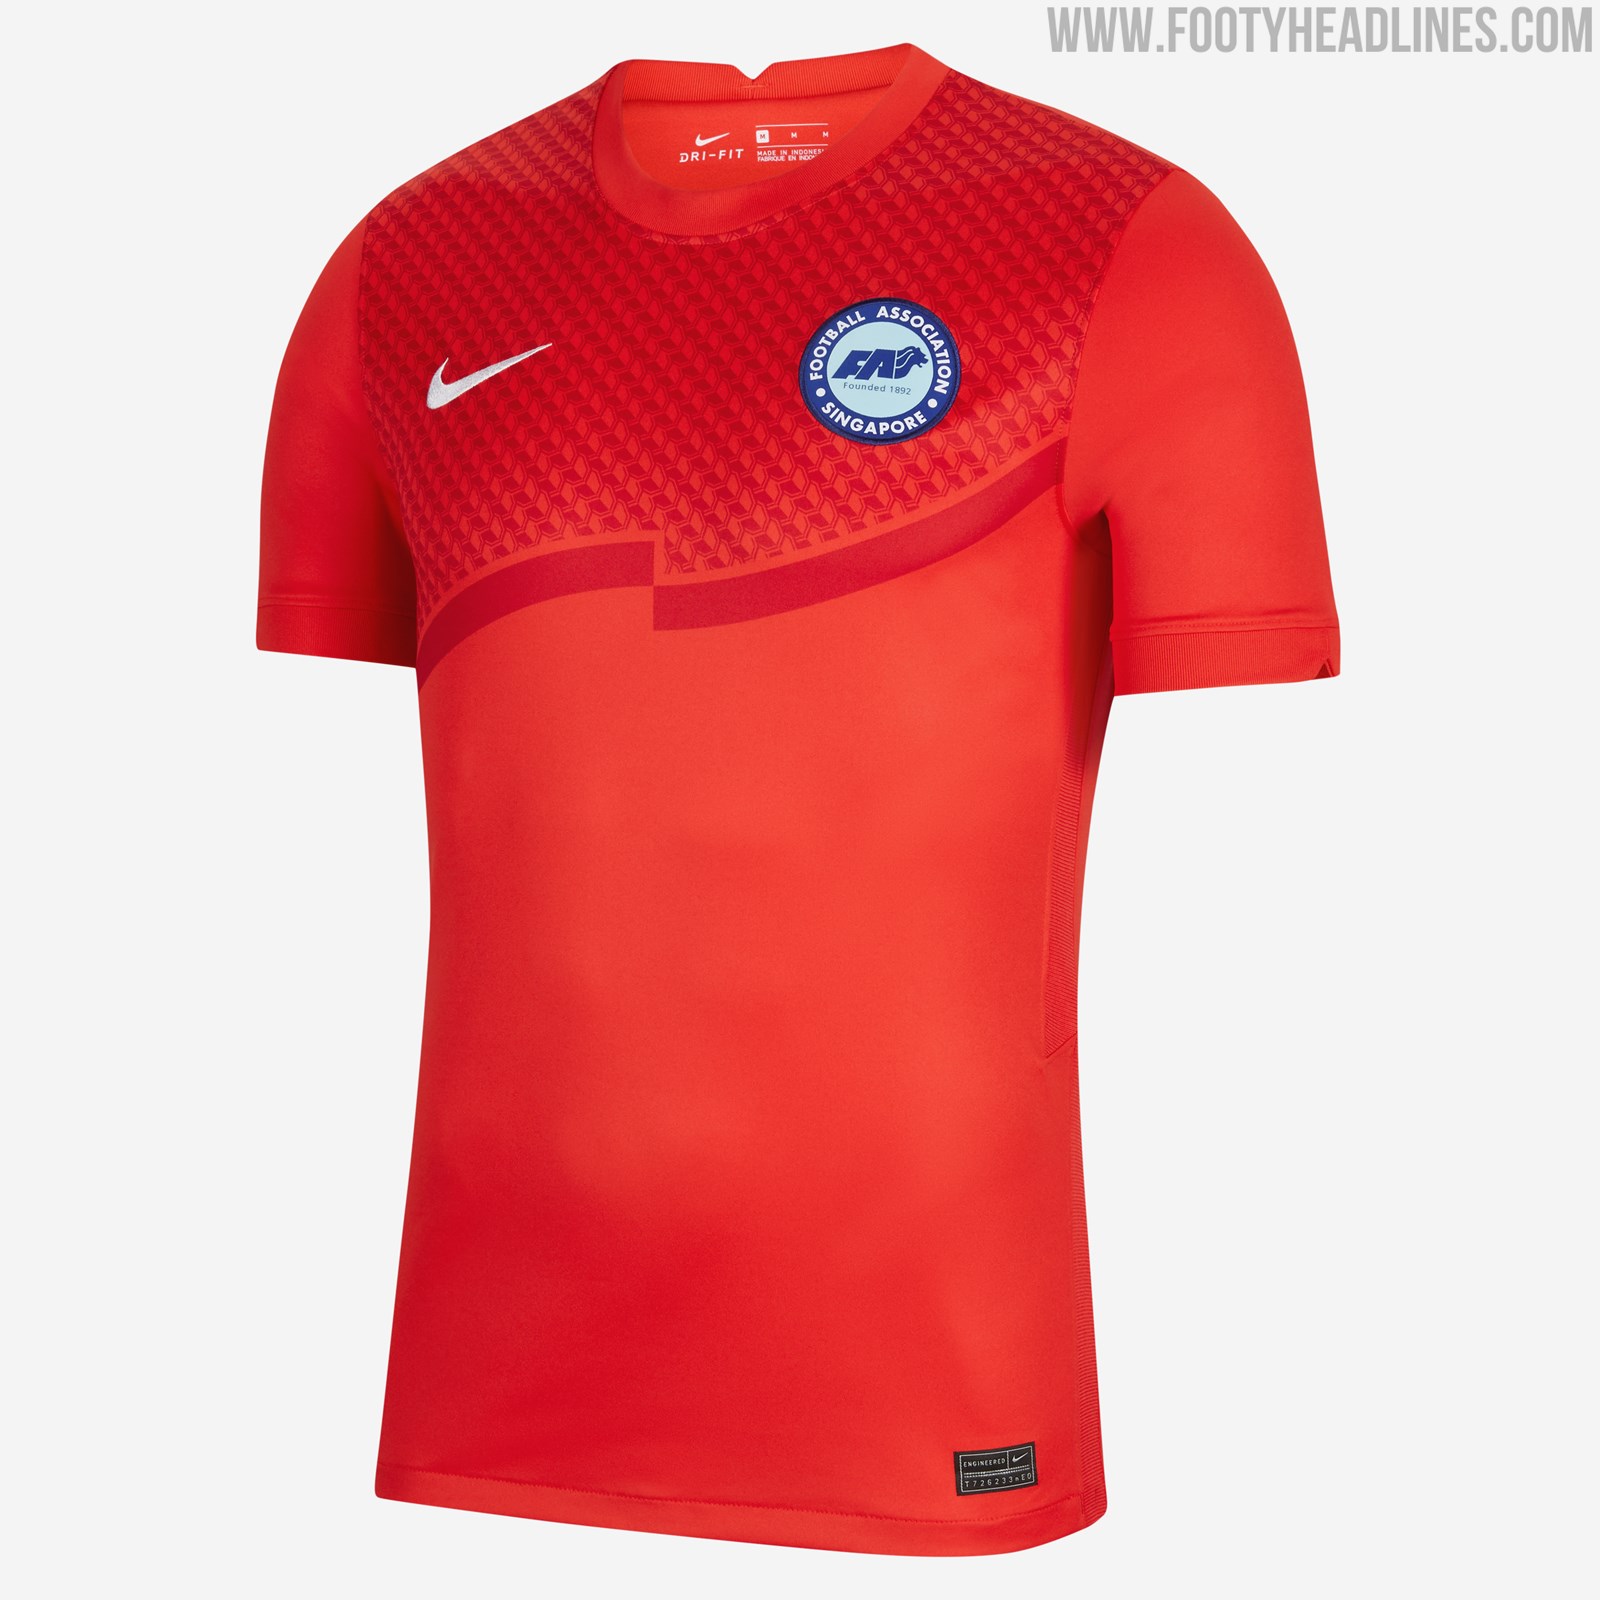 Nike Singapore 2020 Home & Away Kits Released - Feature Crest Instead ...